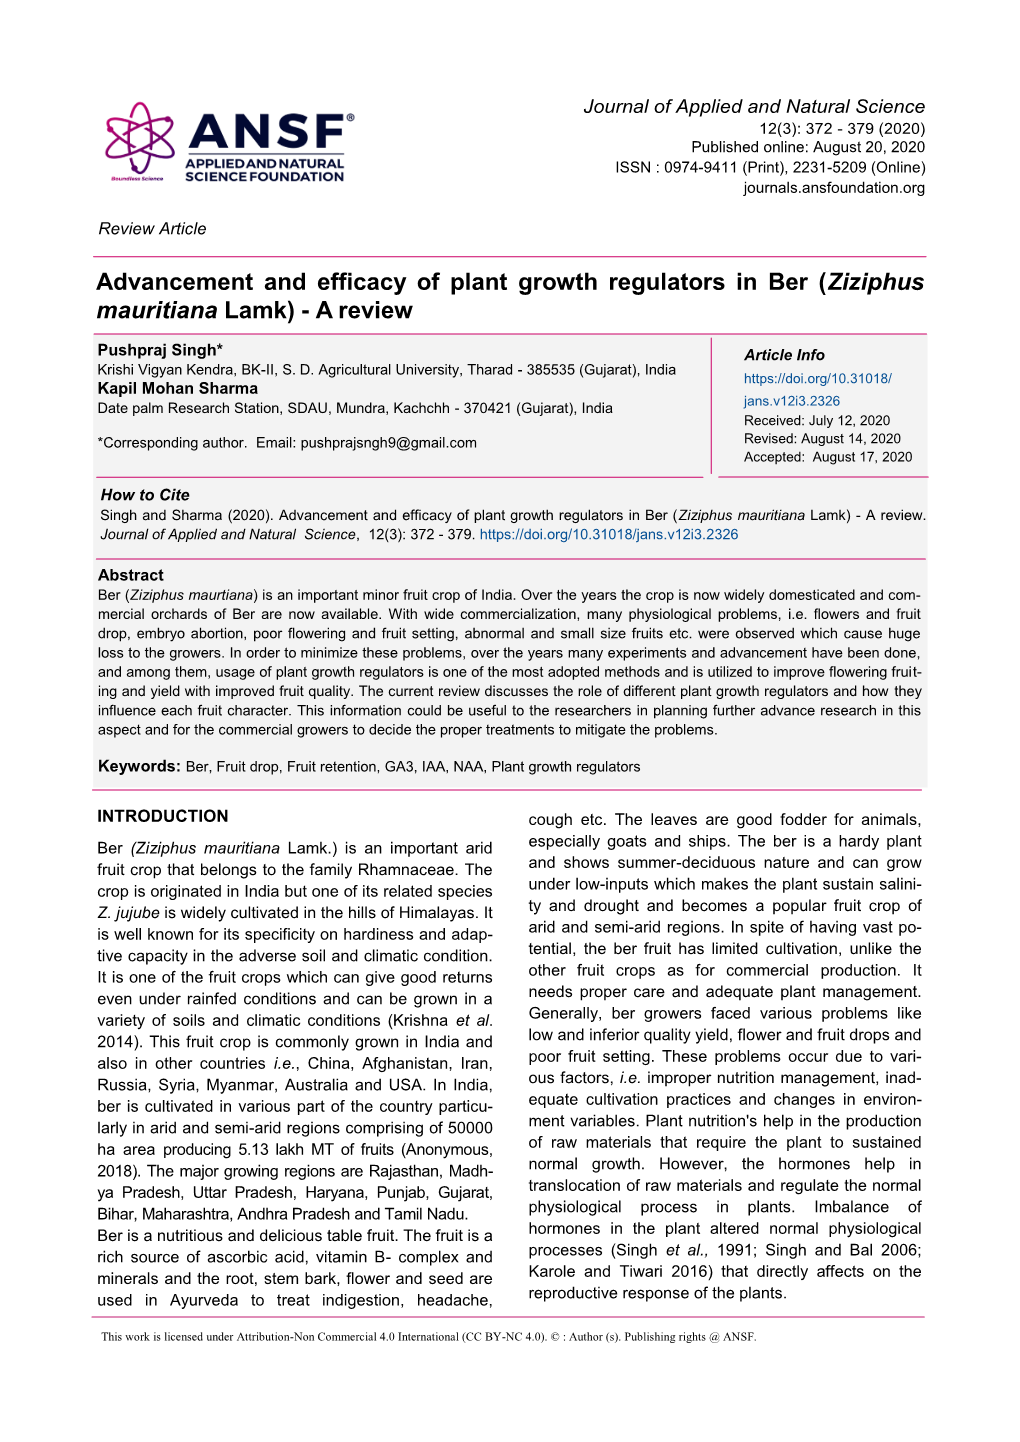 Advancement and Efficacy of Plant Growth Regulators in Ber (Ziziphus Mauritiana Lamk) - a Review